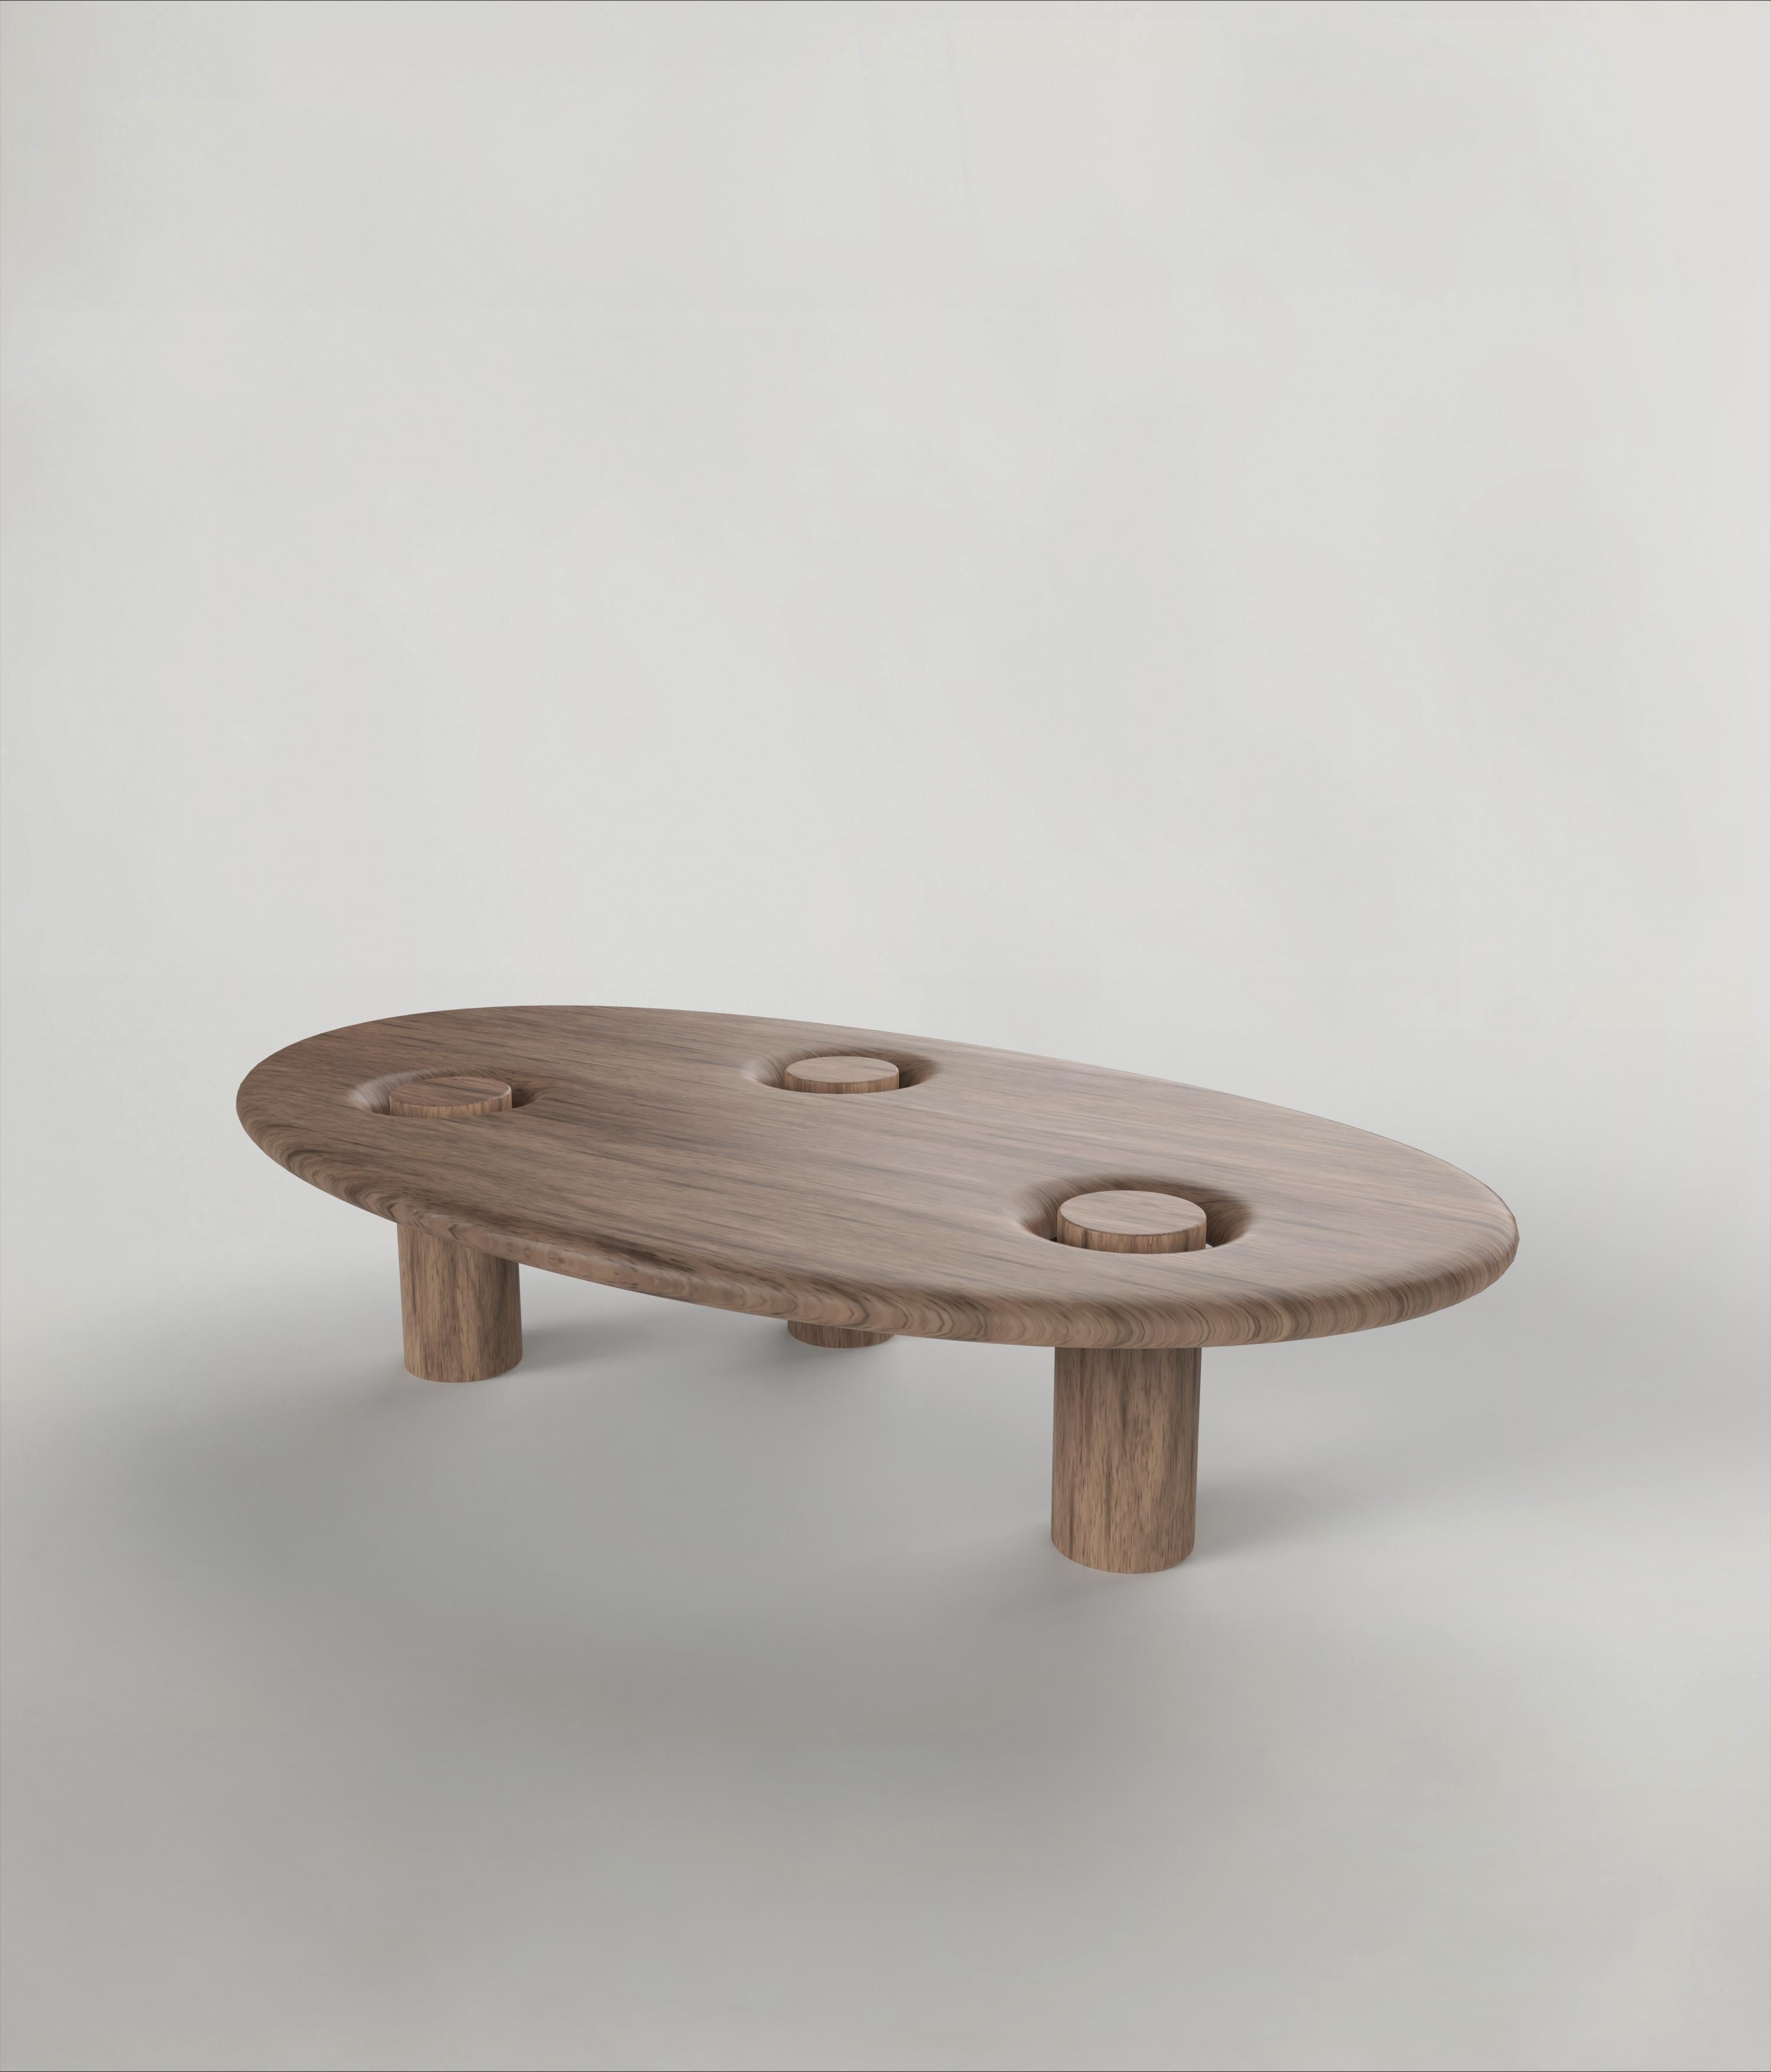 Asido V2 represents the elegance of 21st Century Italian manufacturing, the experience and savoir faire of our woodworkers. The piece is manufactured in a limited edition of 150 signed and progressively numbered examples. It is part of the